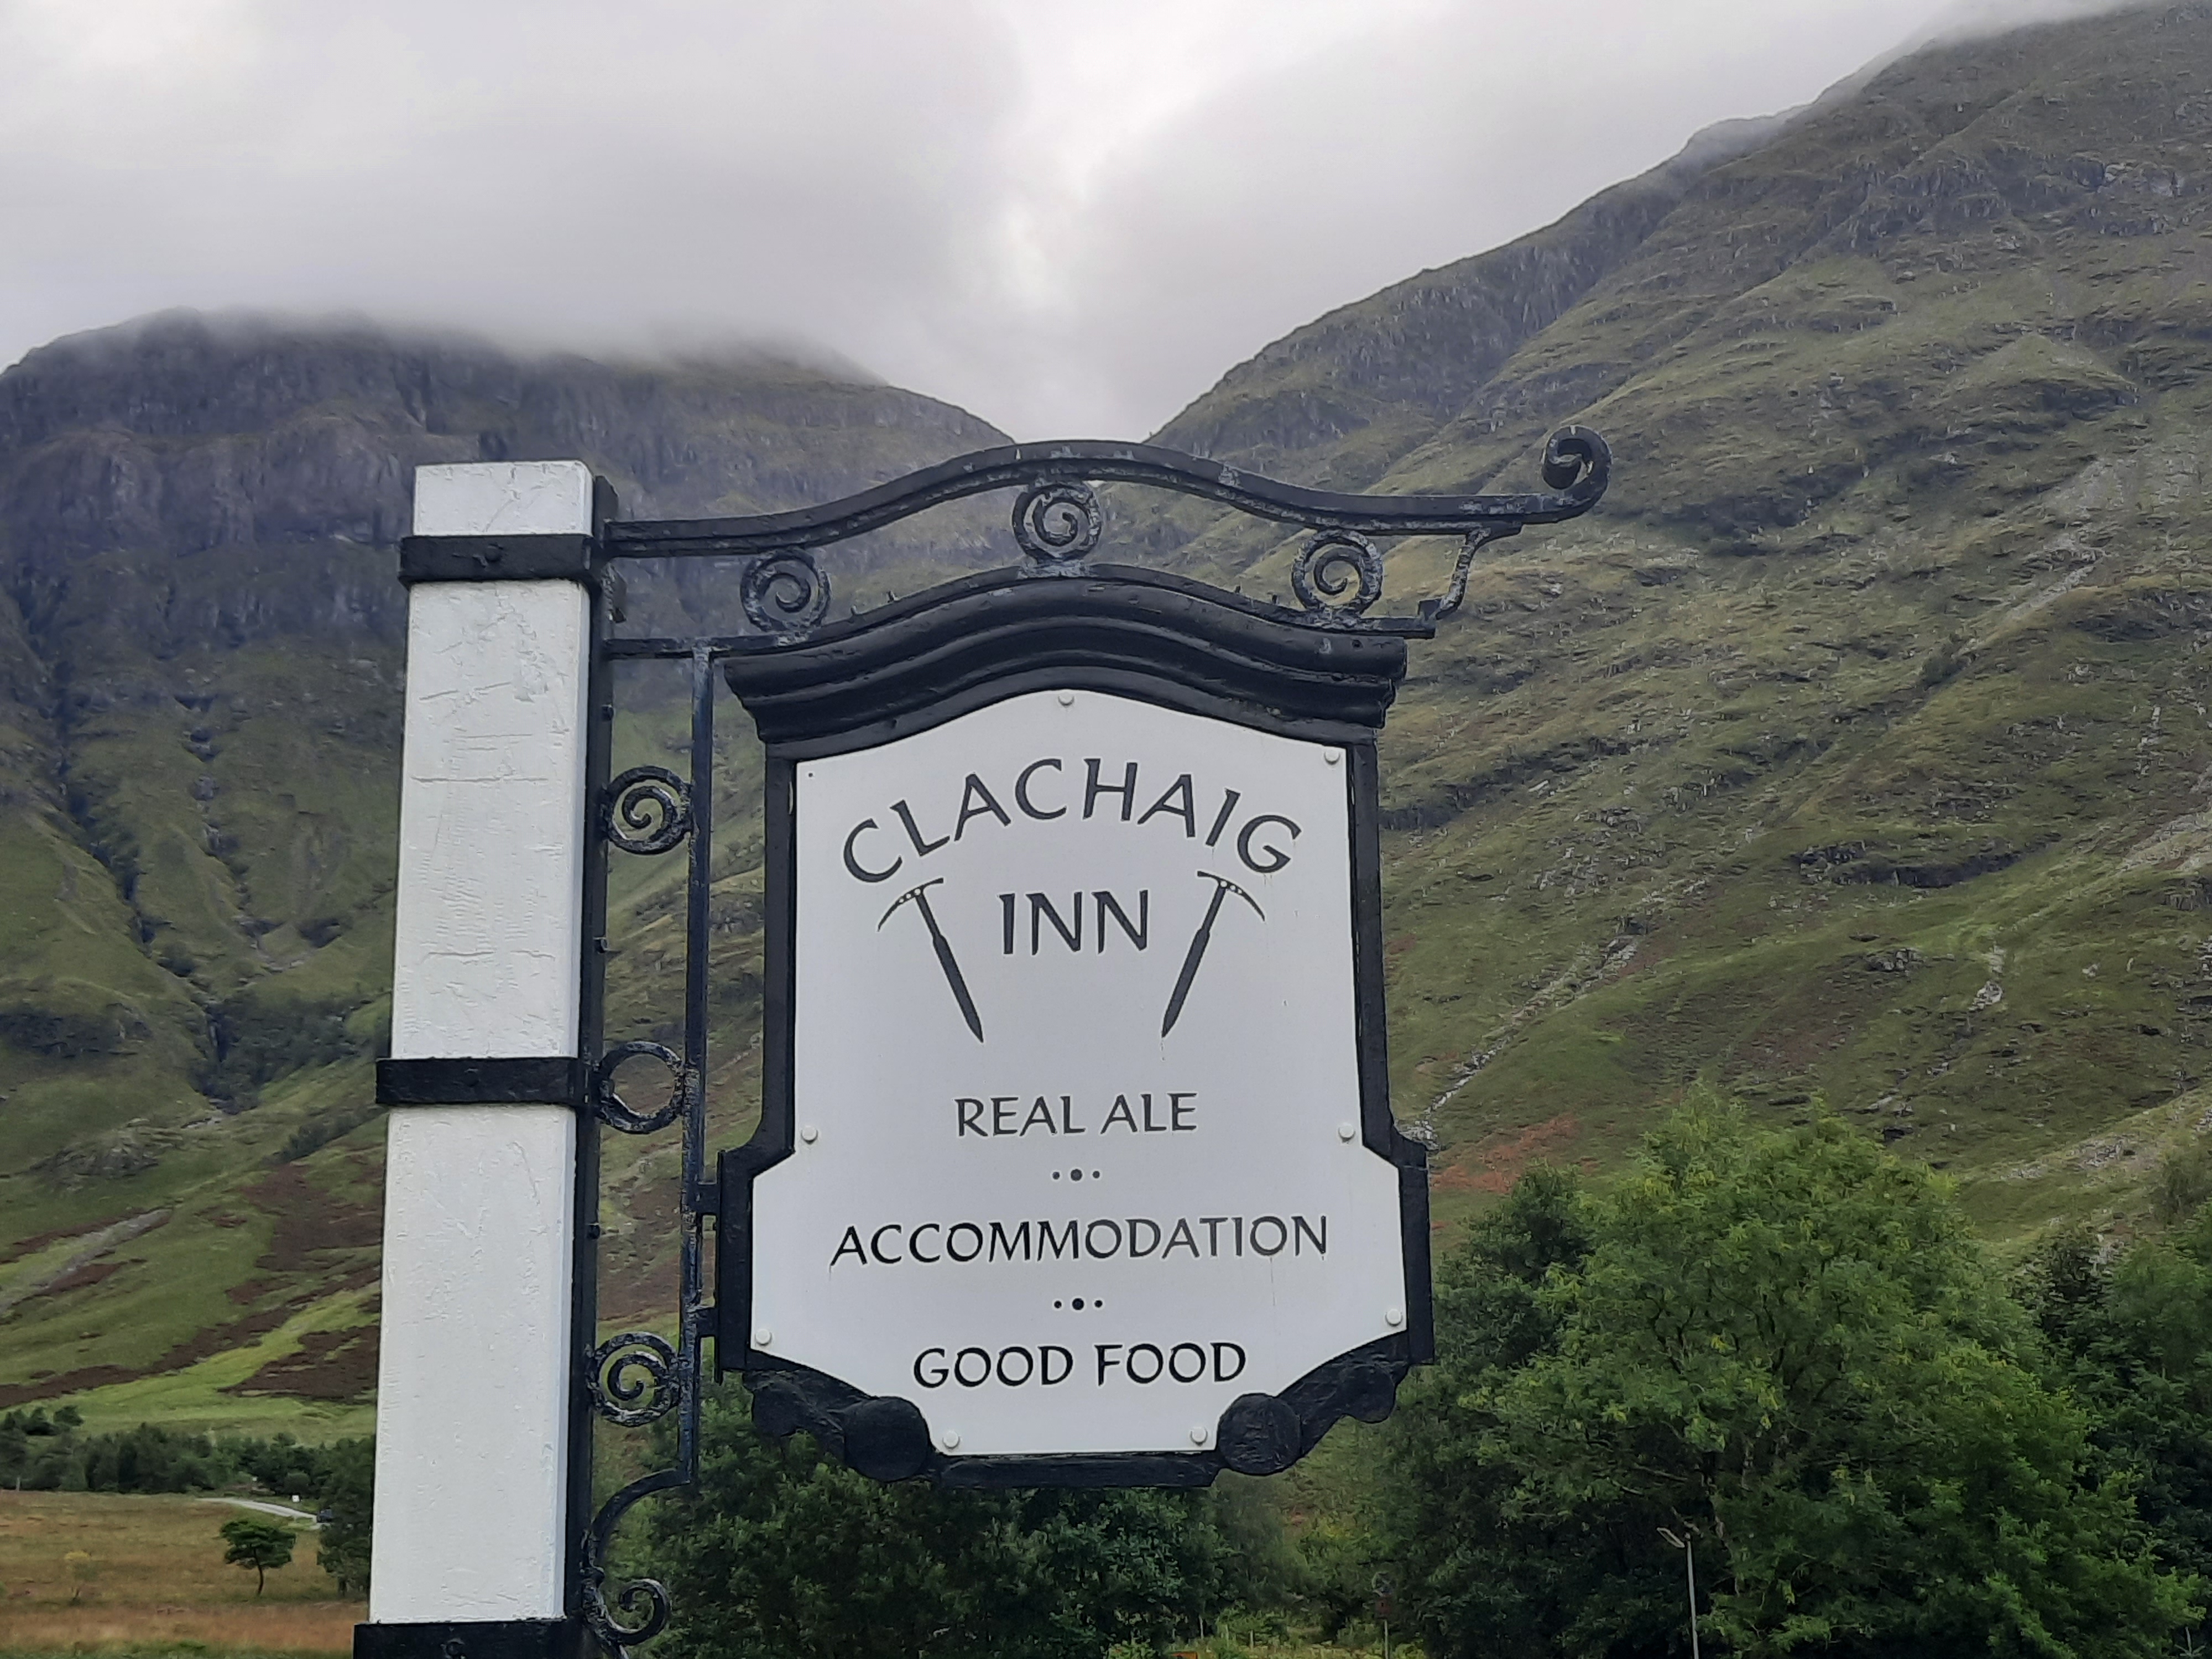 The Clachaig Inn, located in the beautiful Scottish Highlands, was where we spent the first night of our road trip around Scotland. The grounds are stunning. Hagrid's Hut was built across the highway.